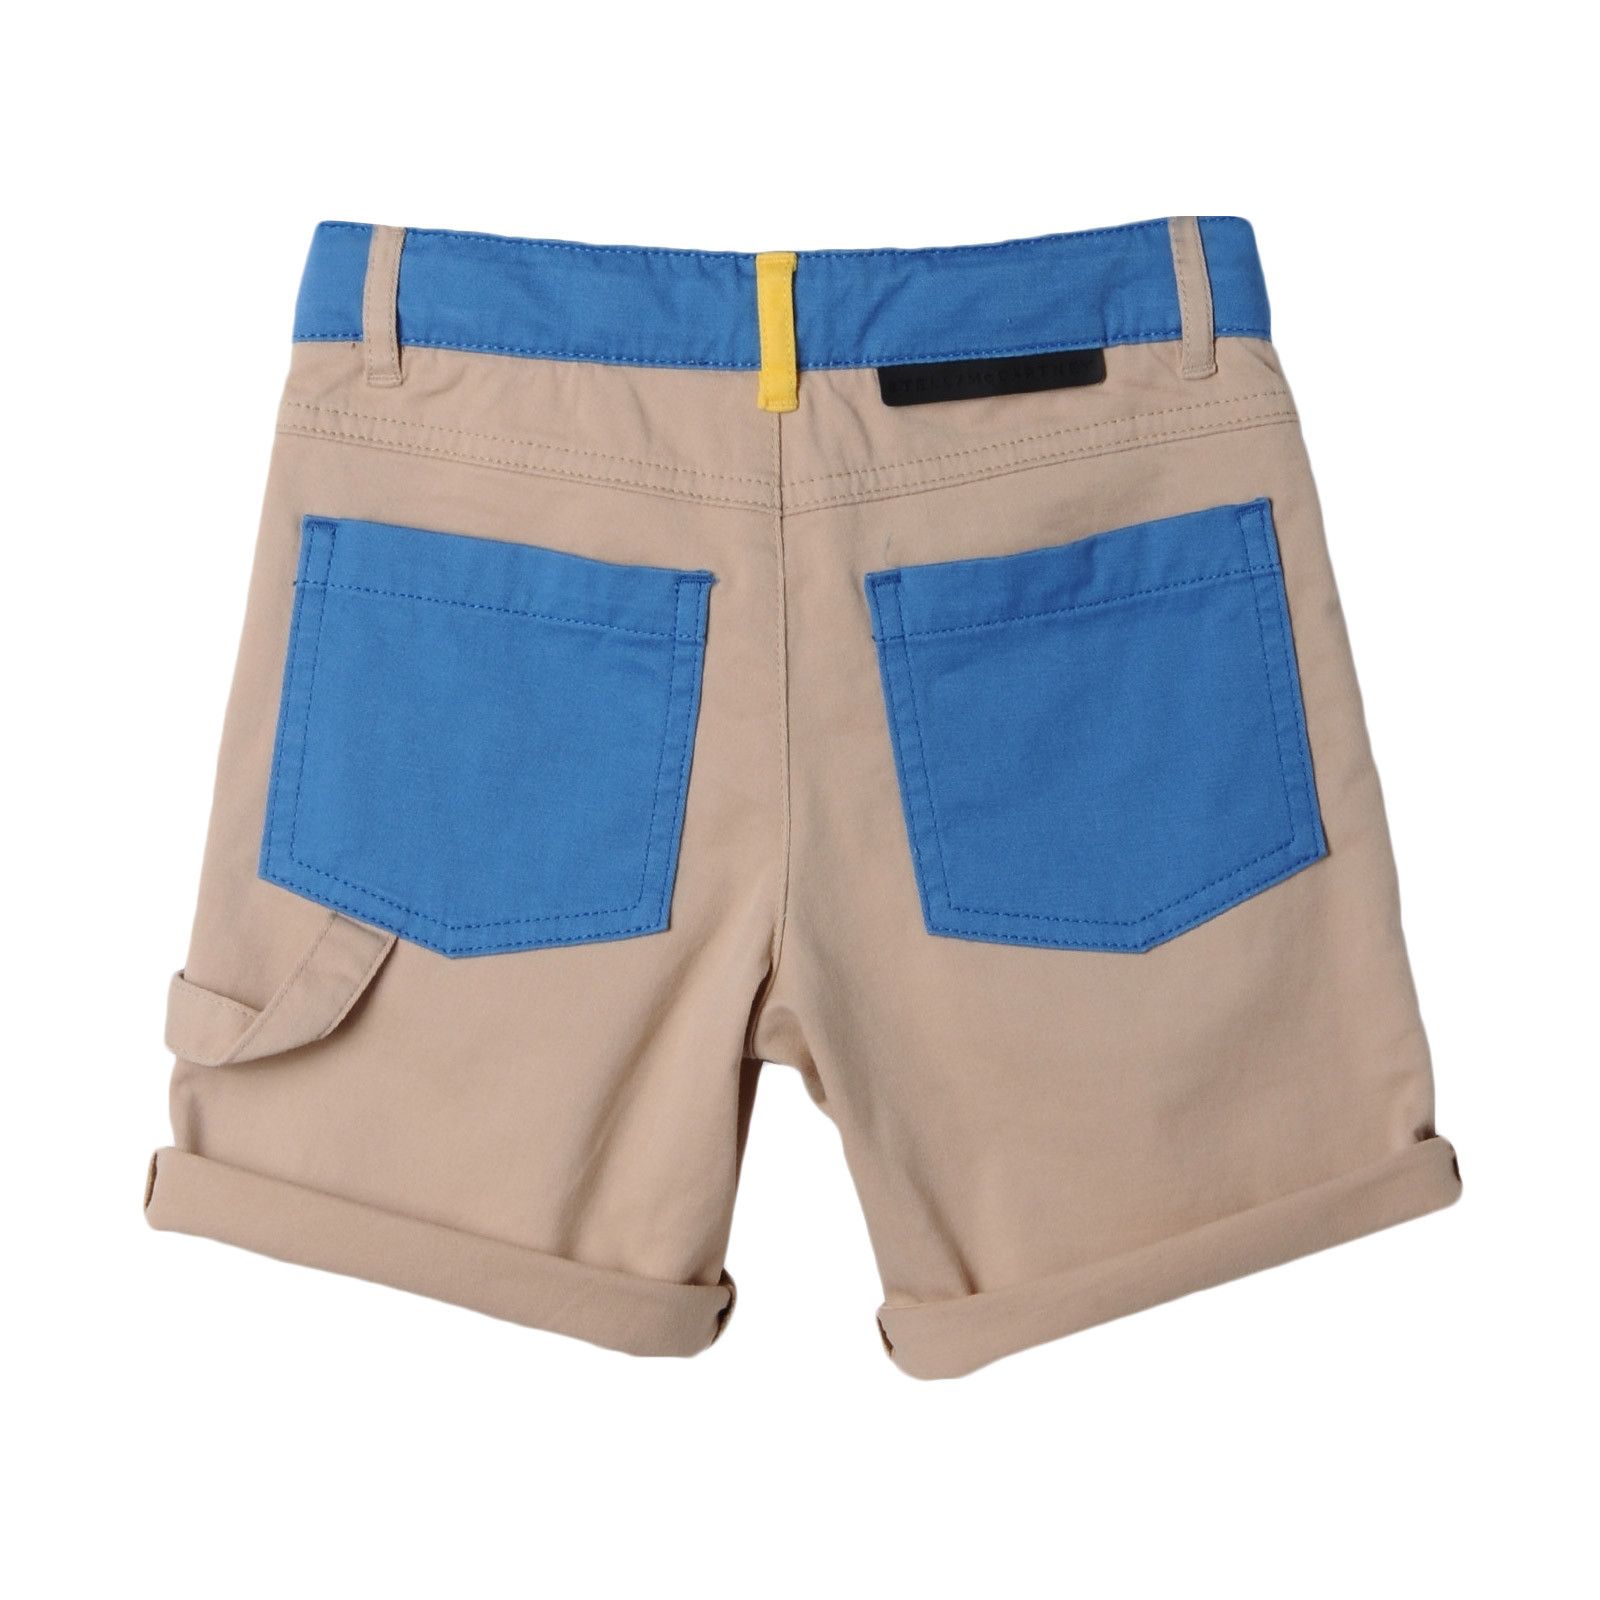 Boys Blue&Grey Patch Pockets Shorts With Turn Up Cuffs - CÉMAROSE | Children's Fashion Store - 2